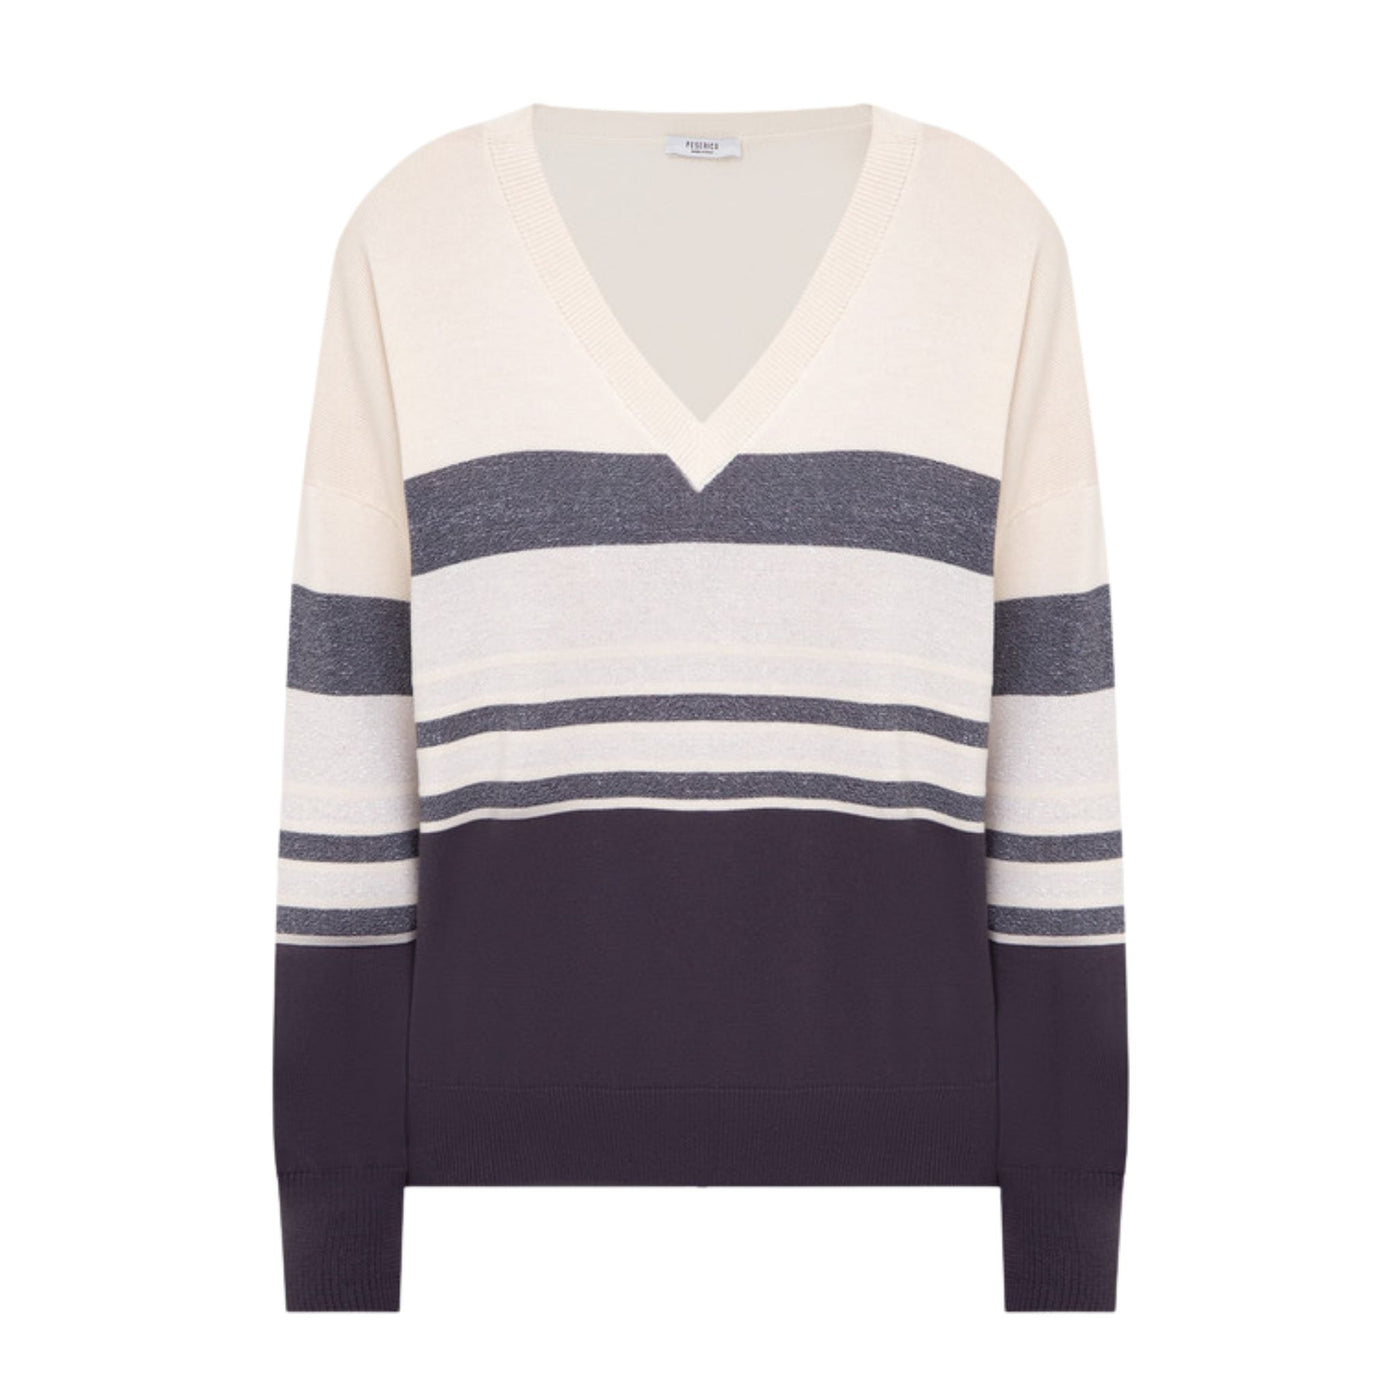 Women's sweater with bright striped pattern